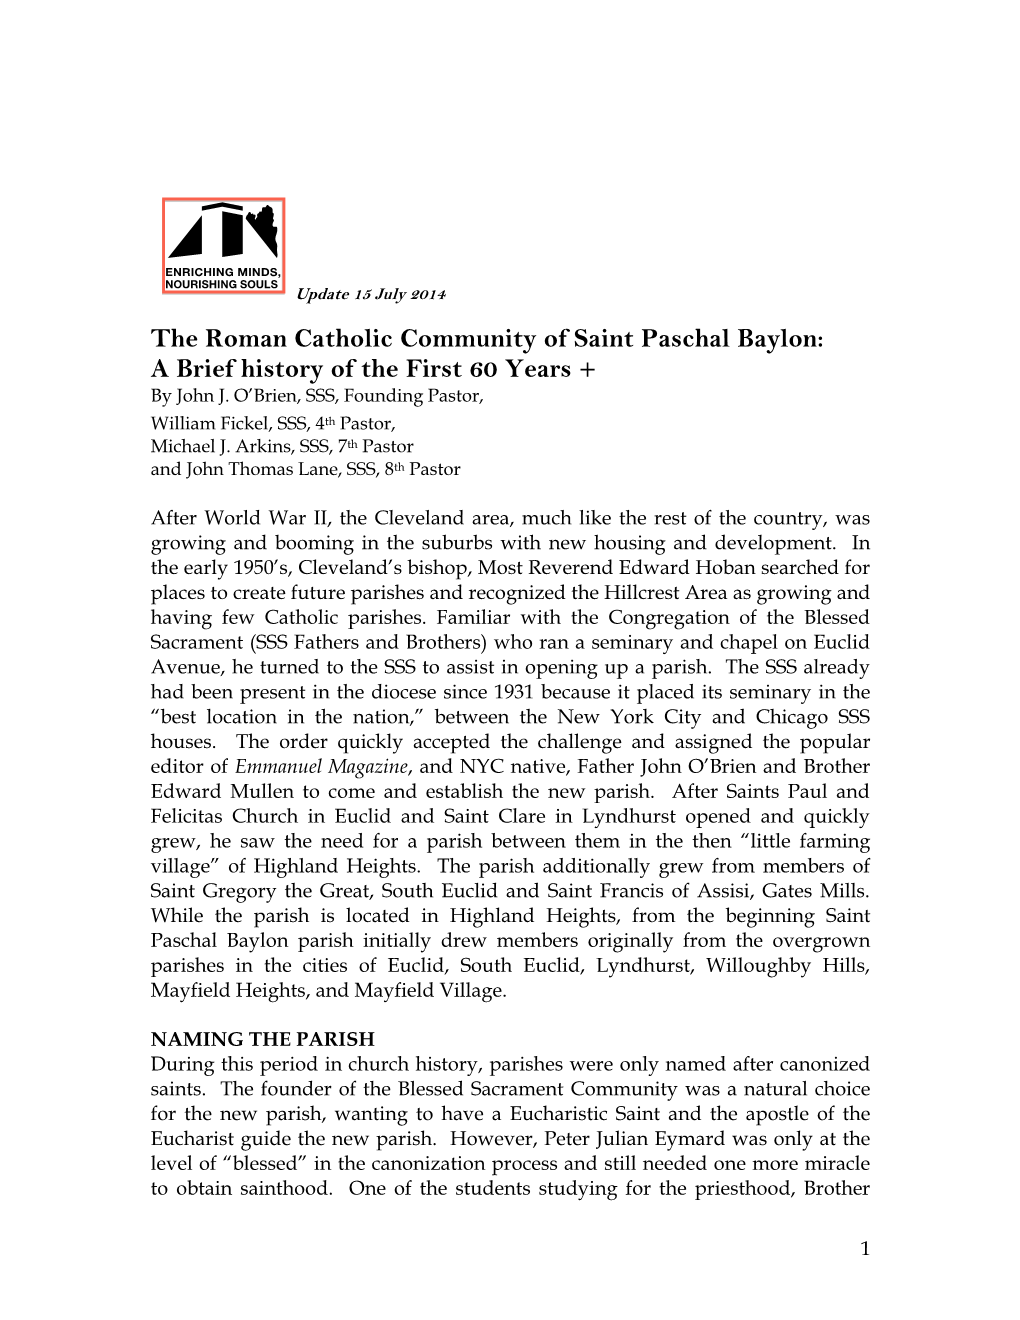 The Roman Catholic Community of Saint Paschal Baylon: a Brief History of the First 60 Years + by John J